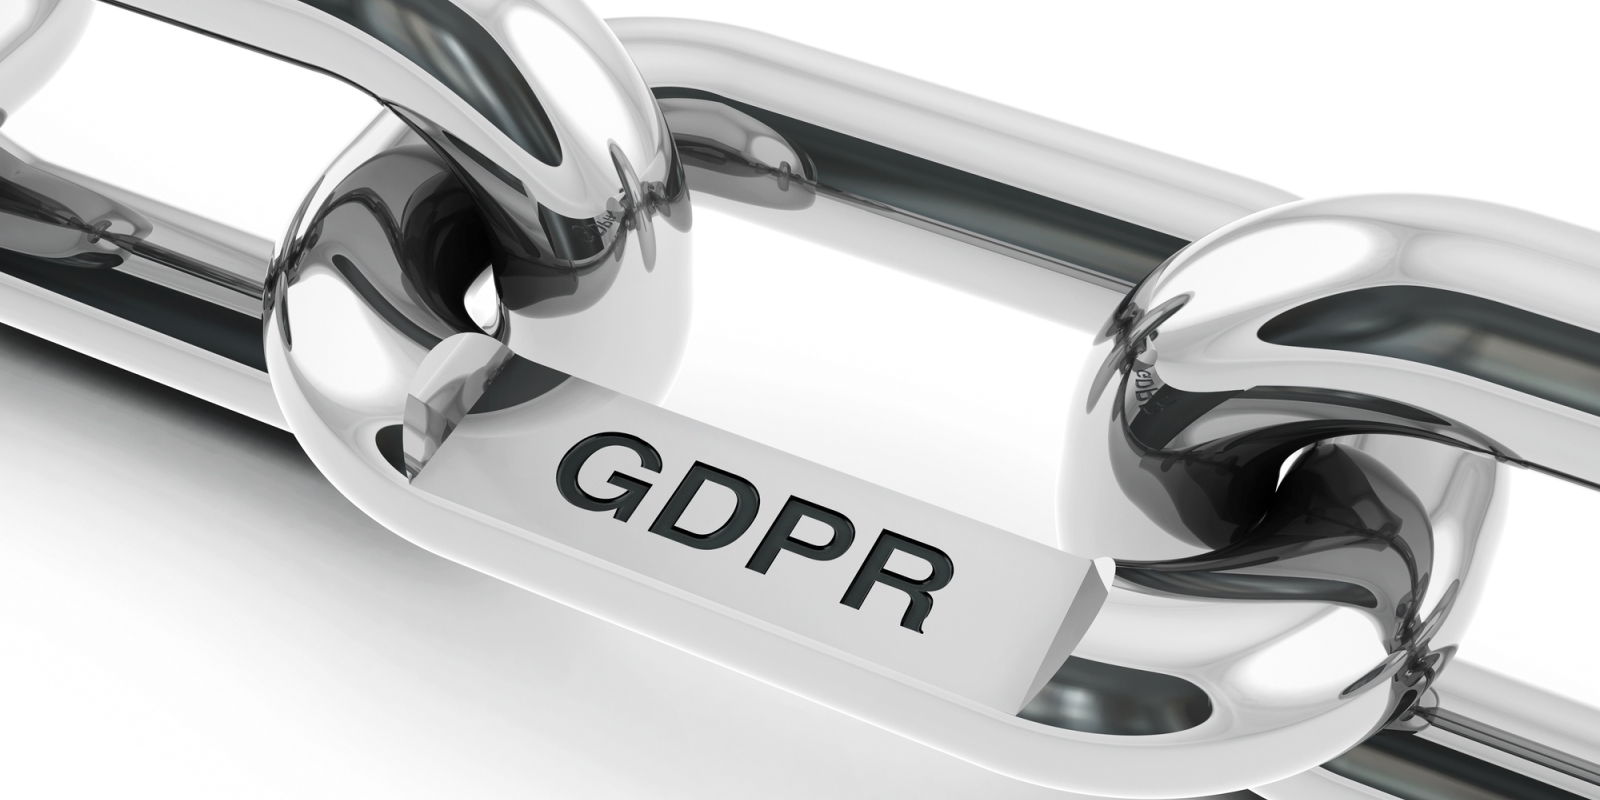 Implementation of GDPR Policies in Practice